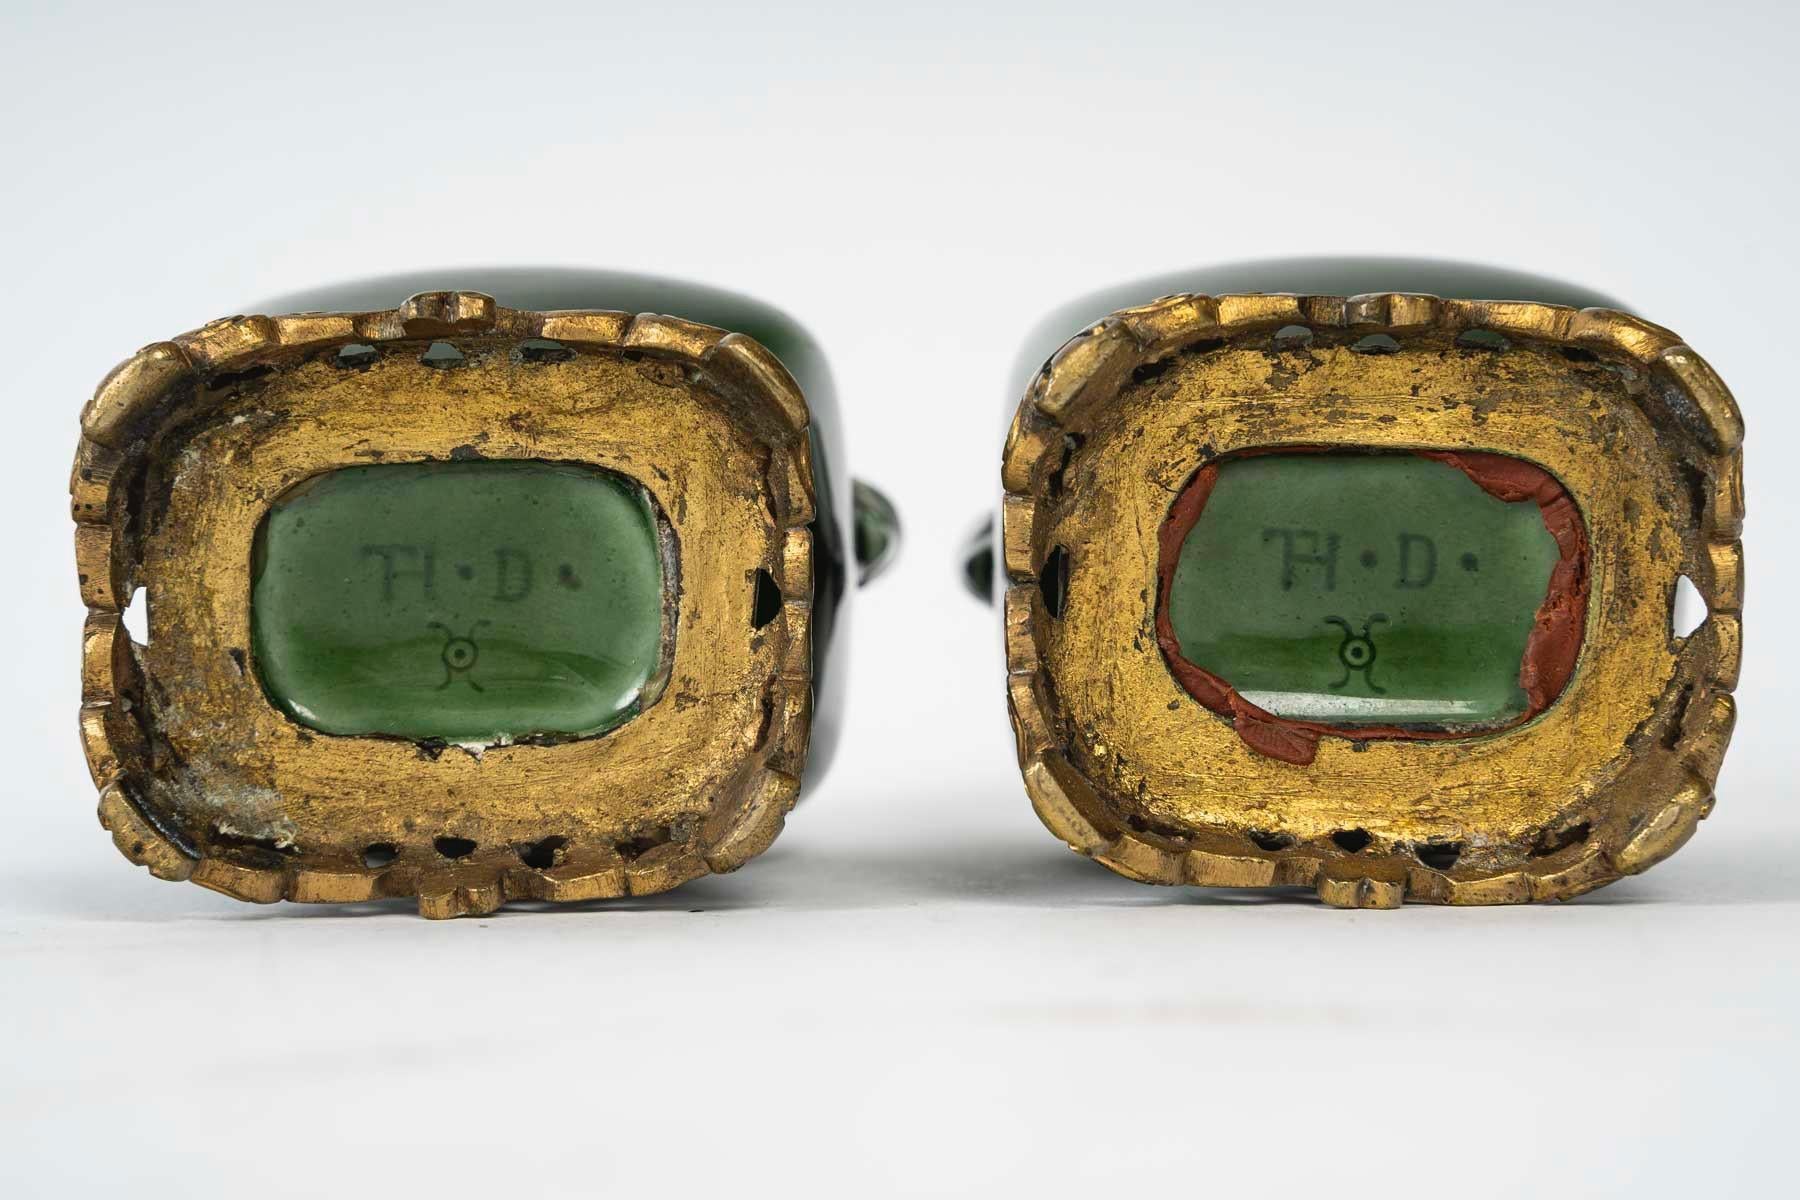 Théodore Deck (1823-1891), Miniature Pair of Faience Vases circa 1870 For Sale 1